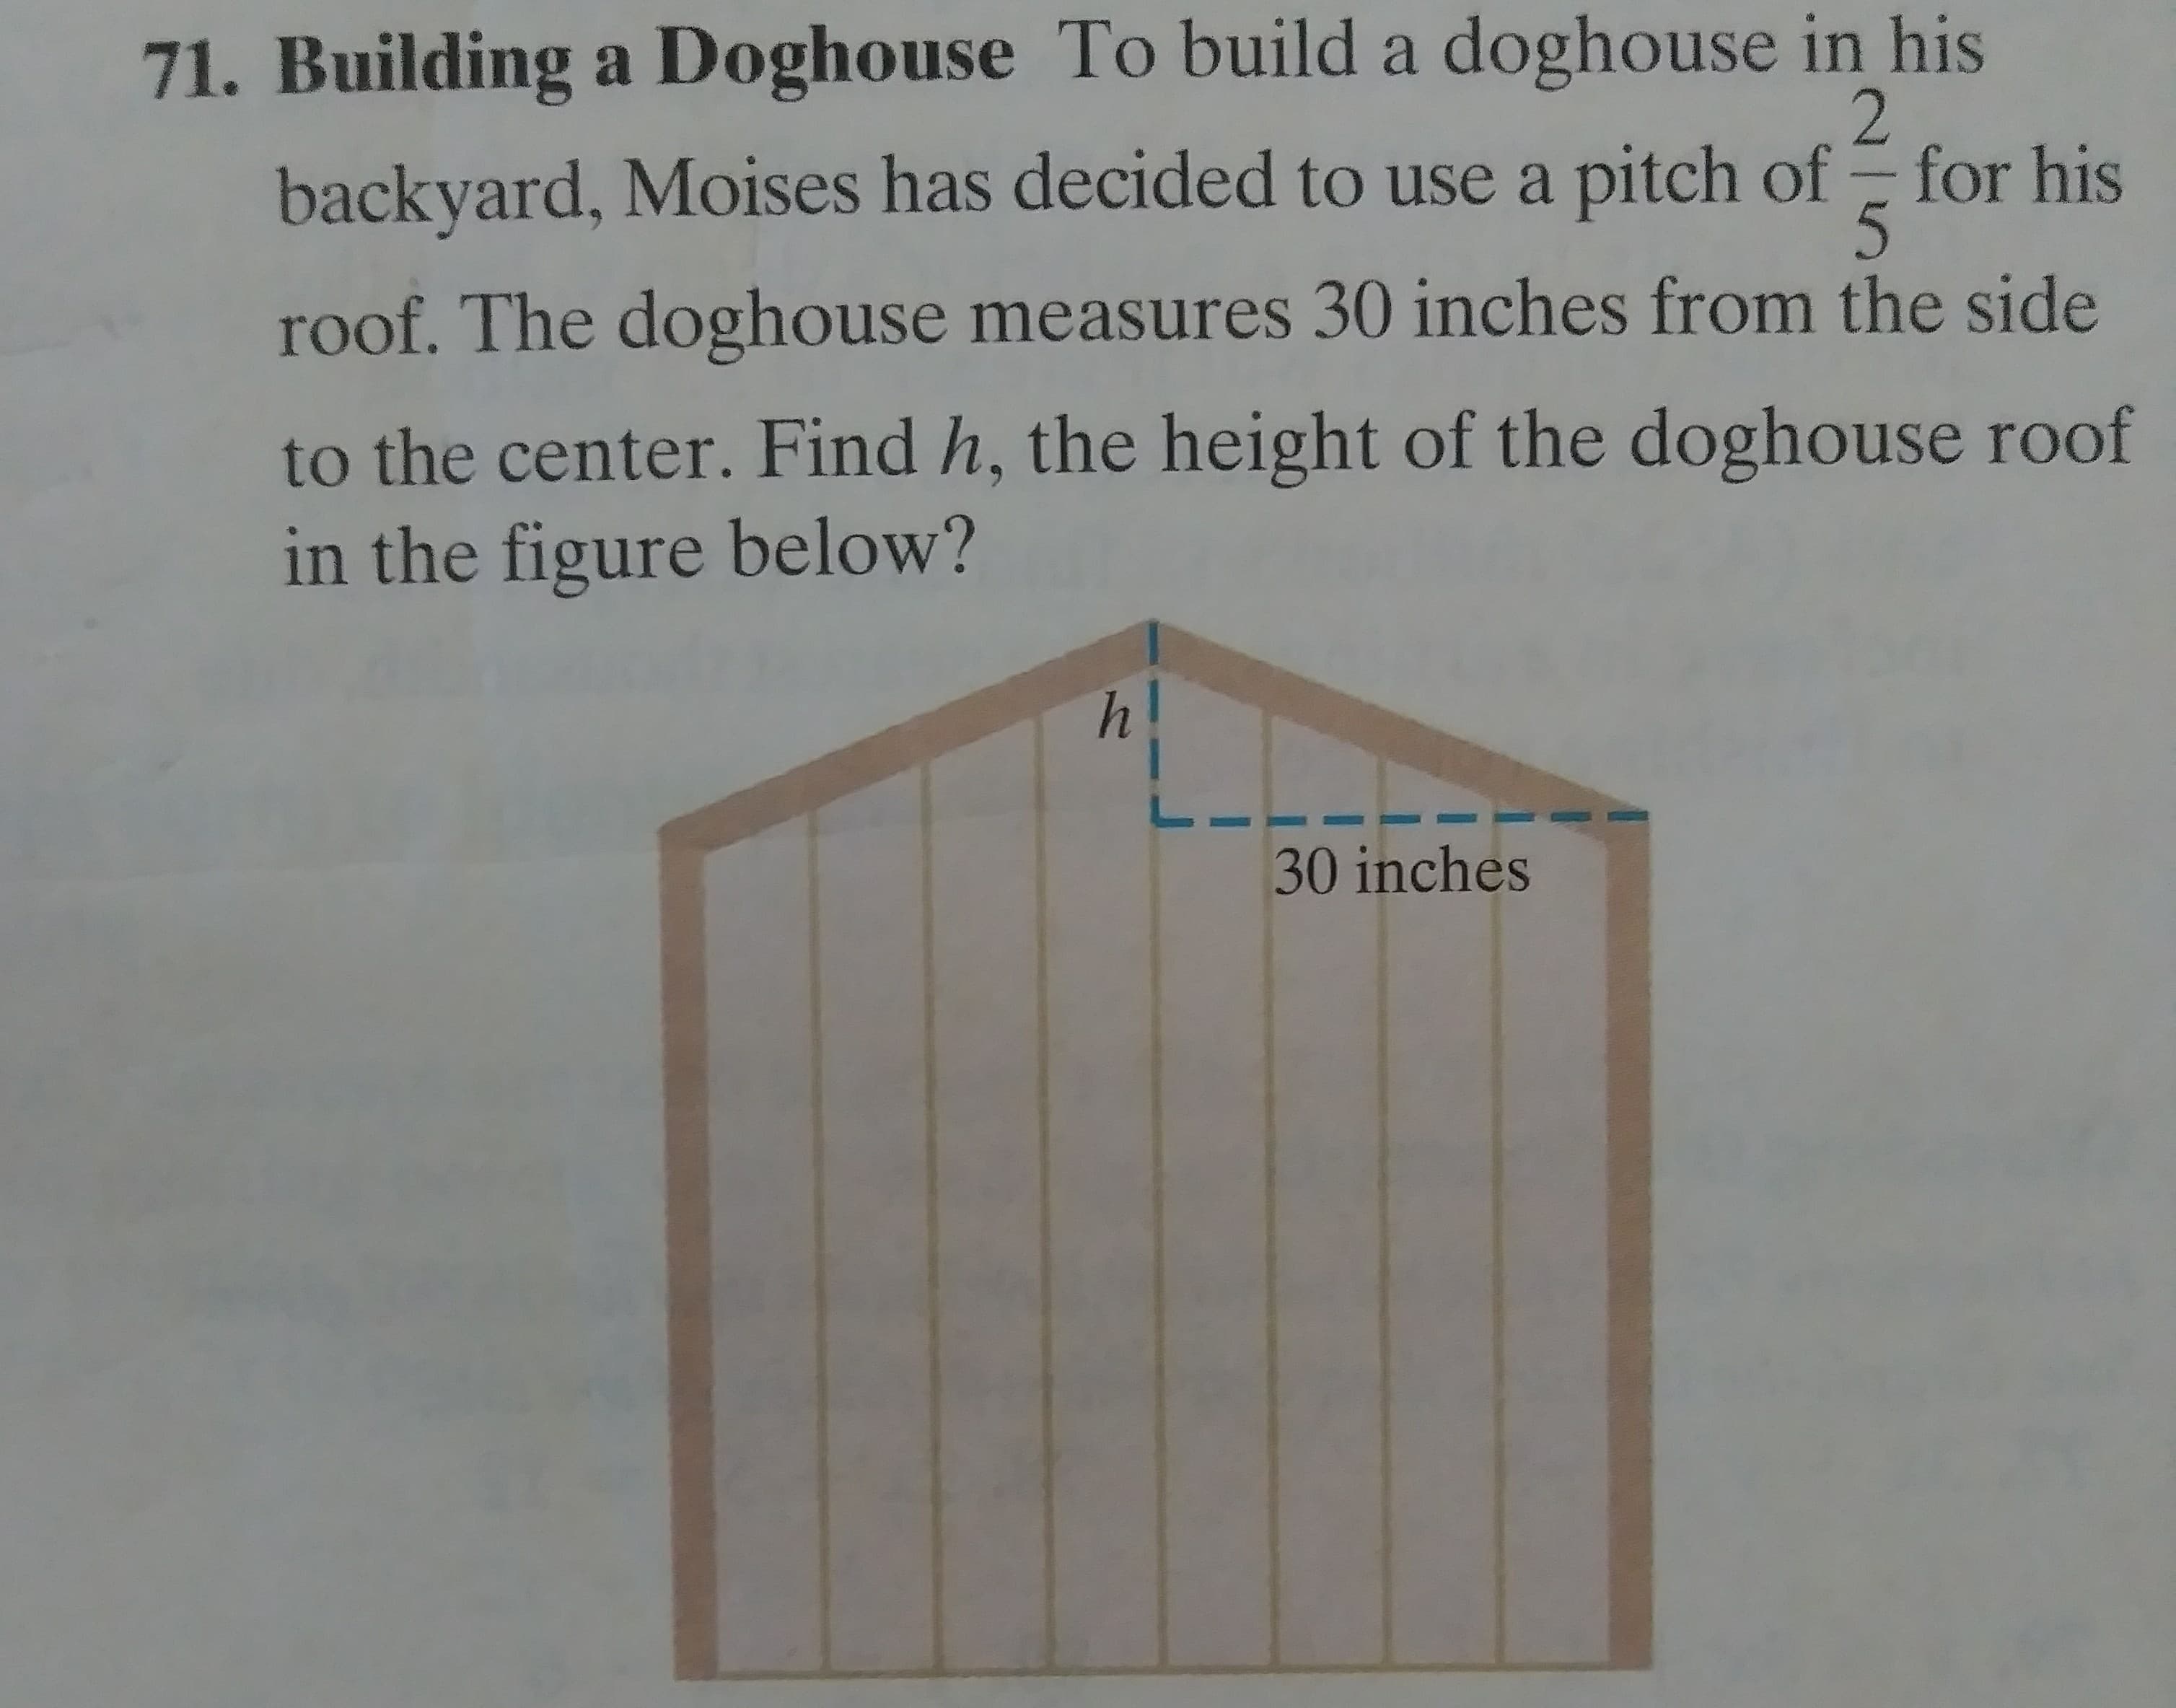 Building a Doghouse To build a doghouse in his
backyard, Moises has decided to use a pitch of for his
roof. The doghouse measures 30 inches from the side
to the center. Find h, the height of the doghouse roof
in the figure below?
